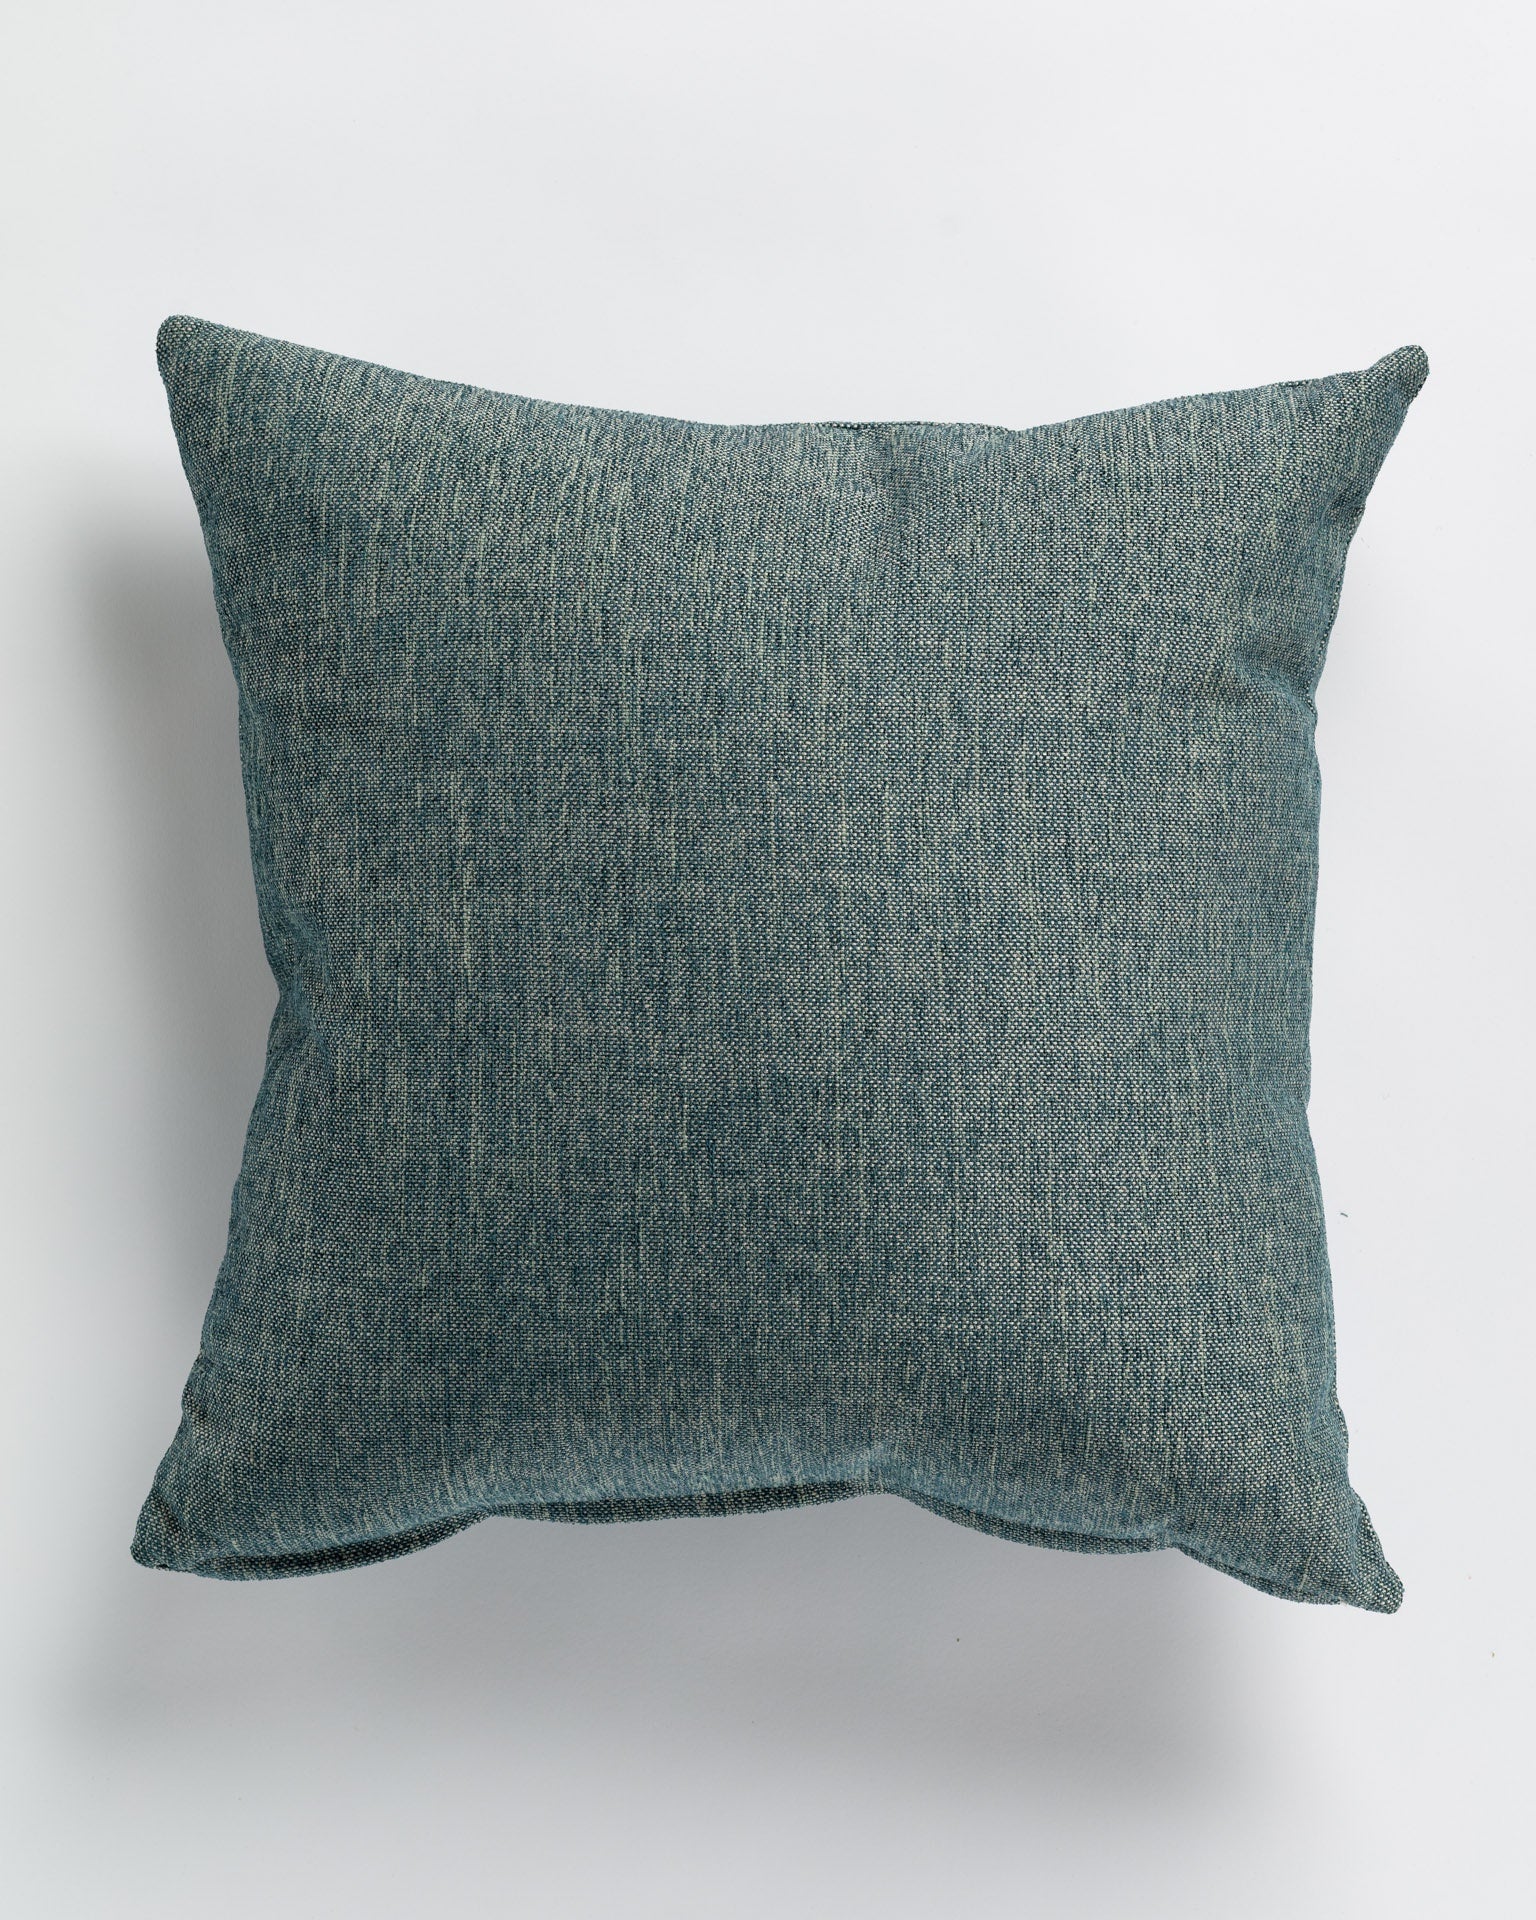 A simple Binds Haze Pillow 26x26 in Gabby style isolated on a white background.